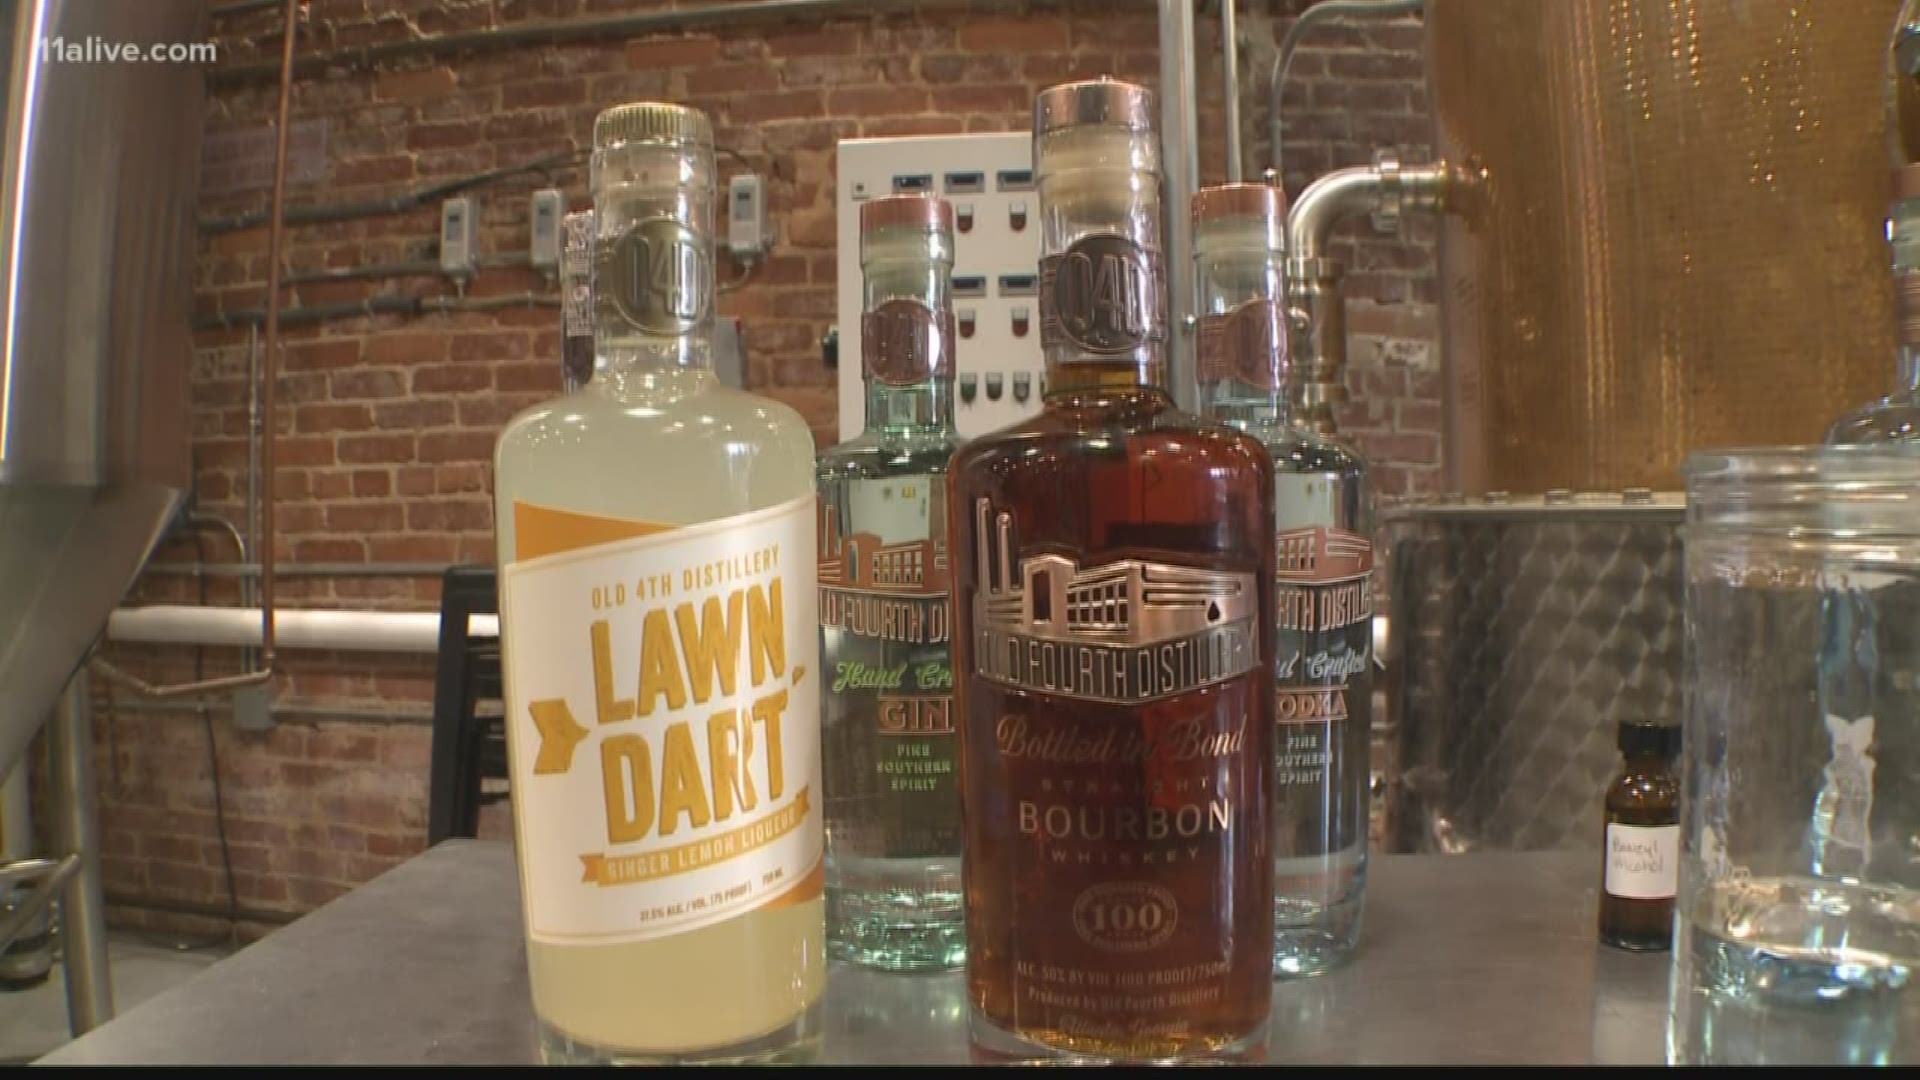 The Old Fourth Distillery is working to ramp up production and help first responders in need of sanitizers